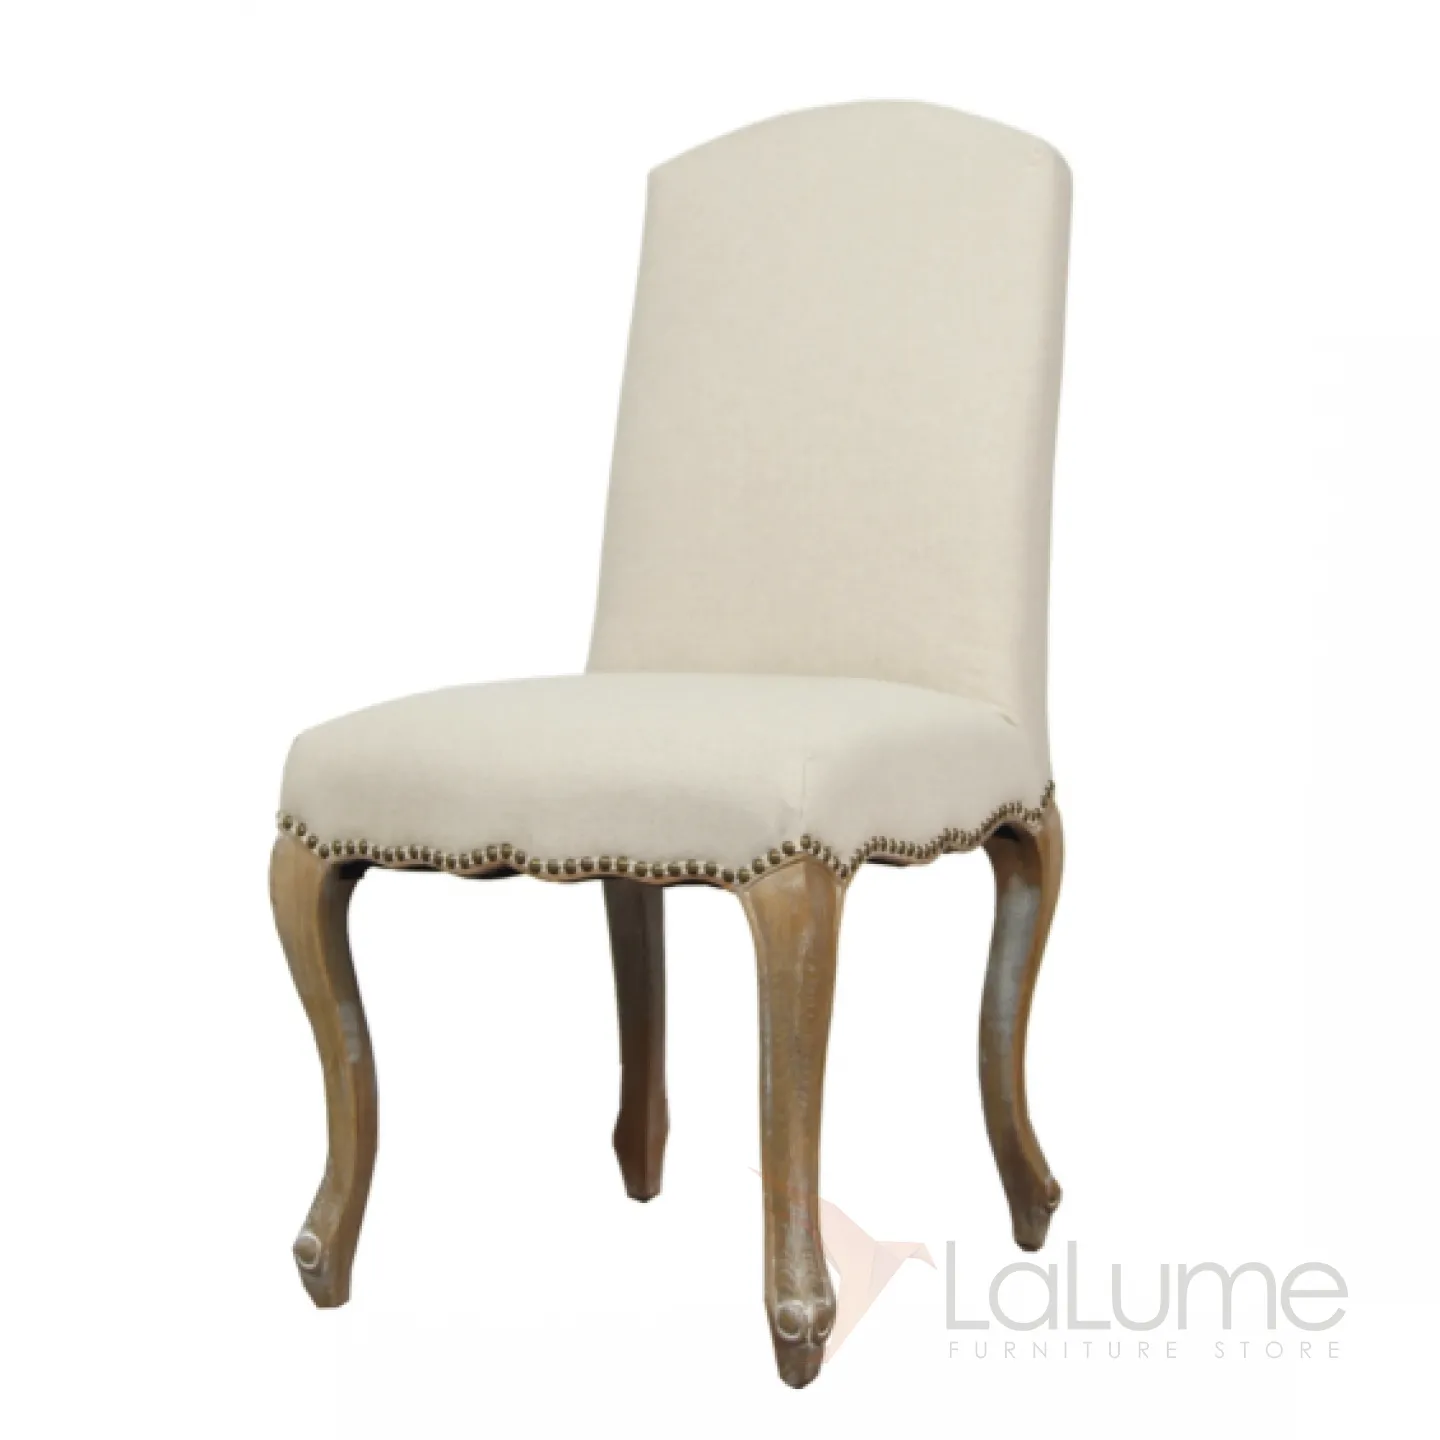 French Chairs Provence Full Beige Chair